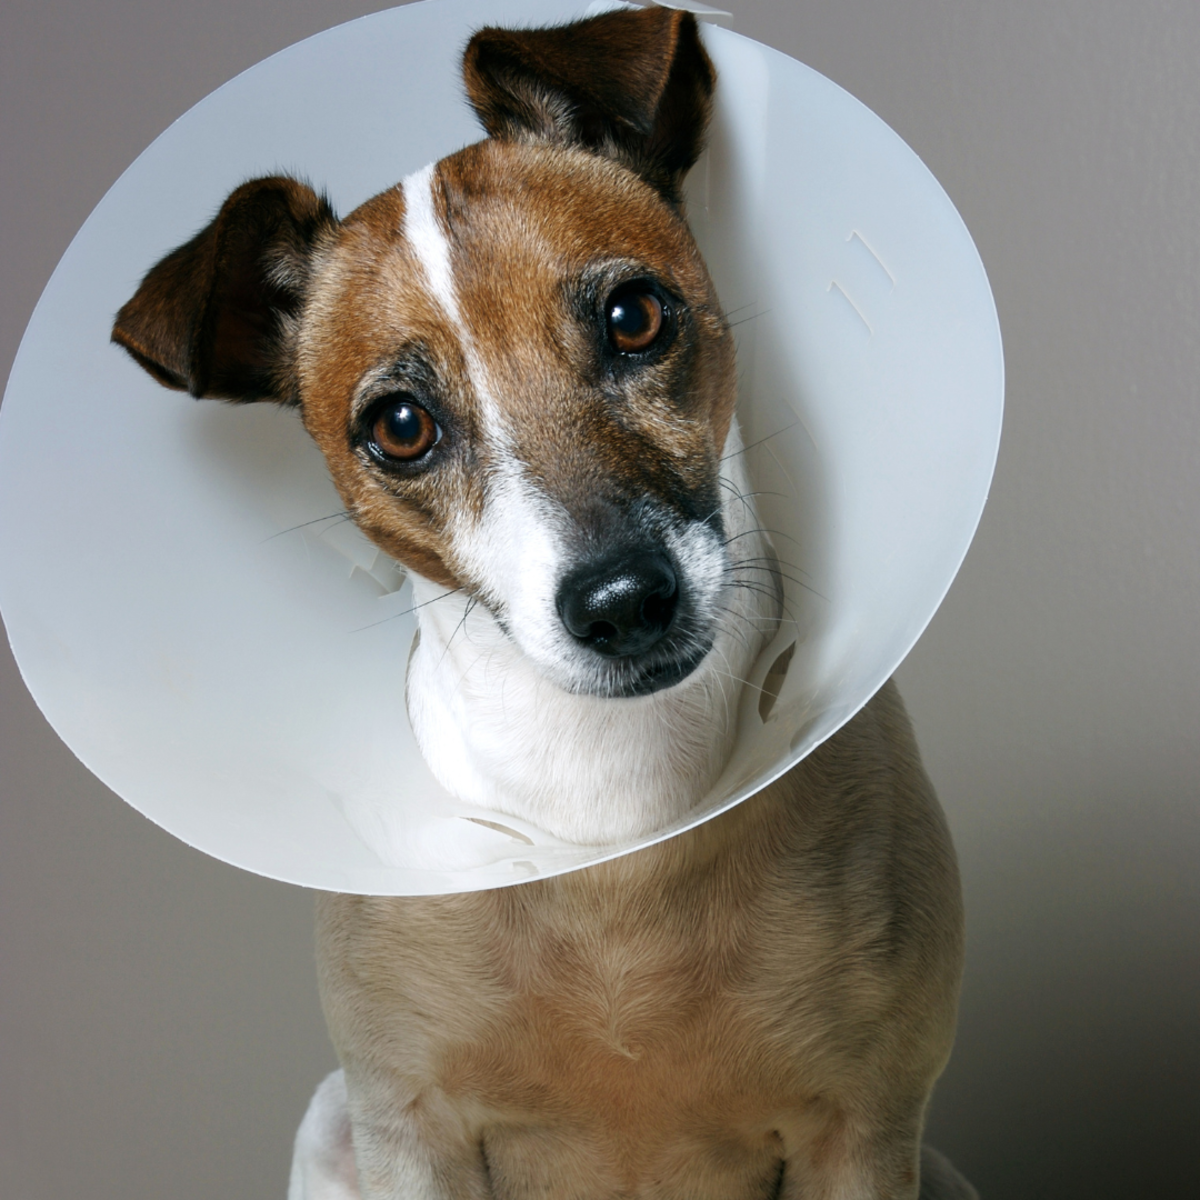 The Elizabethan collar, AKA "cone of shame" can help prevent trouble to your dog's stitches